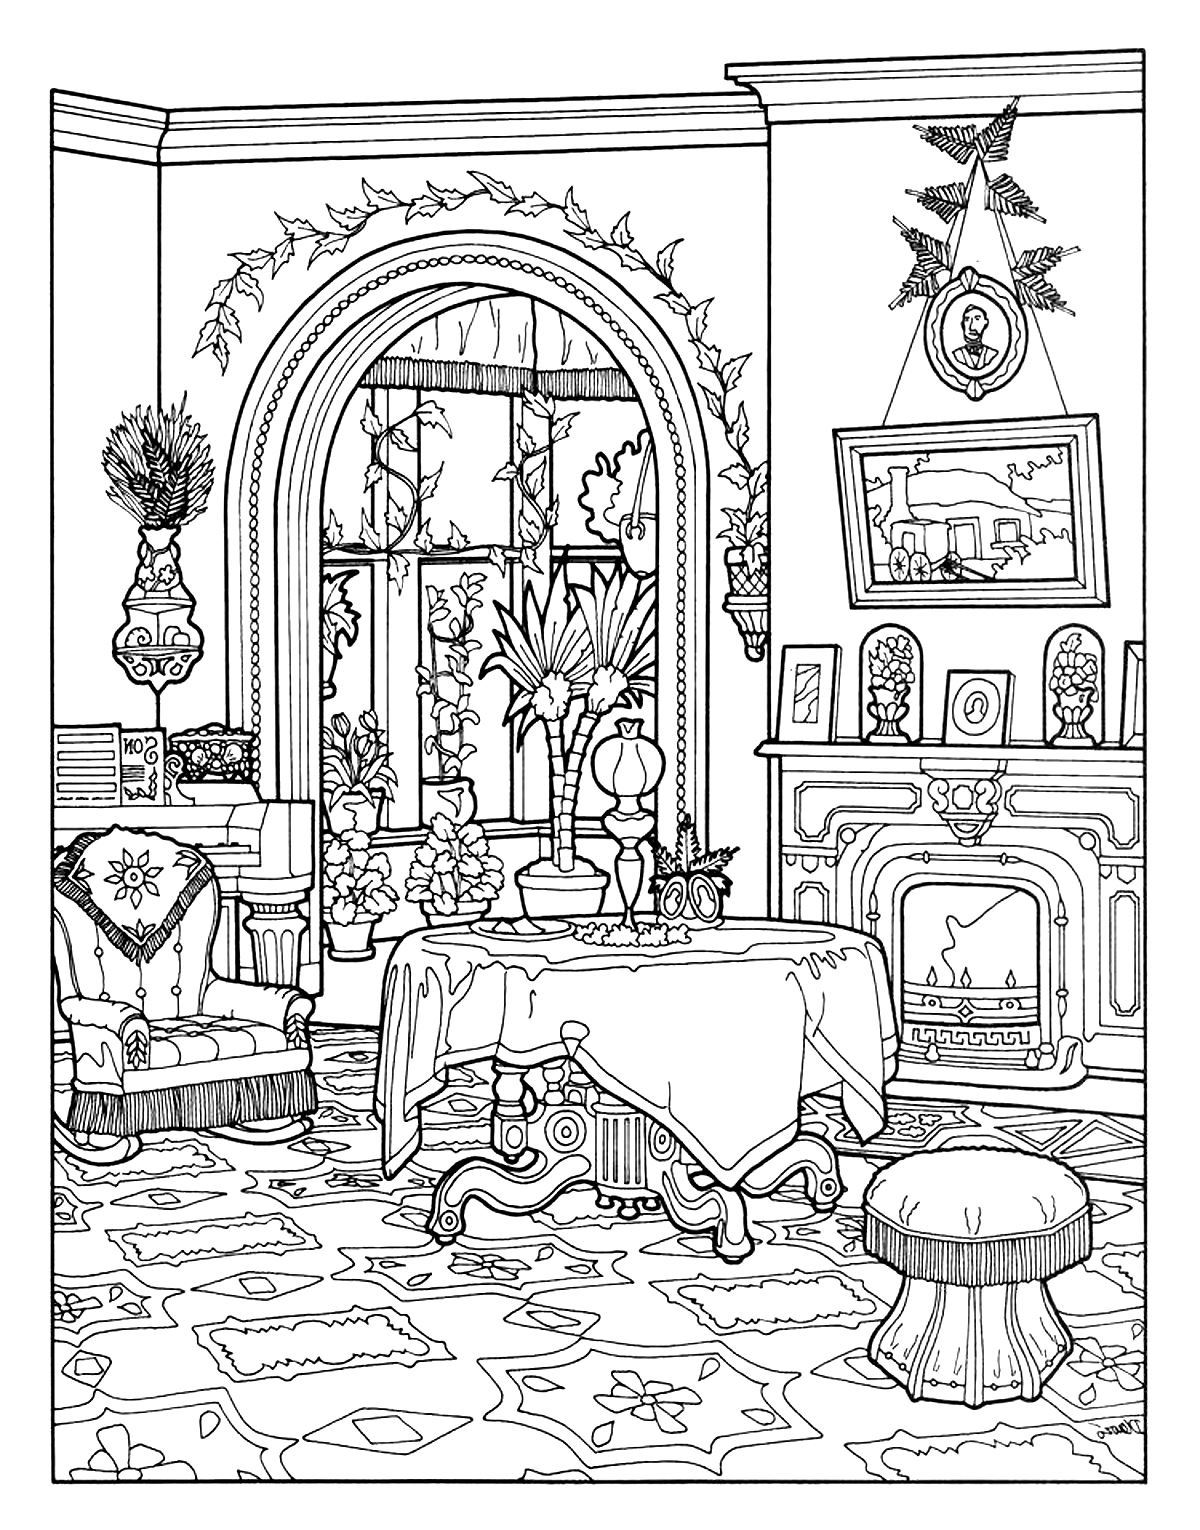 Download Victorian interior style - Architecture Adult Coloring Pages